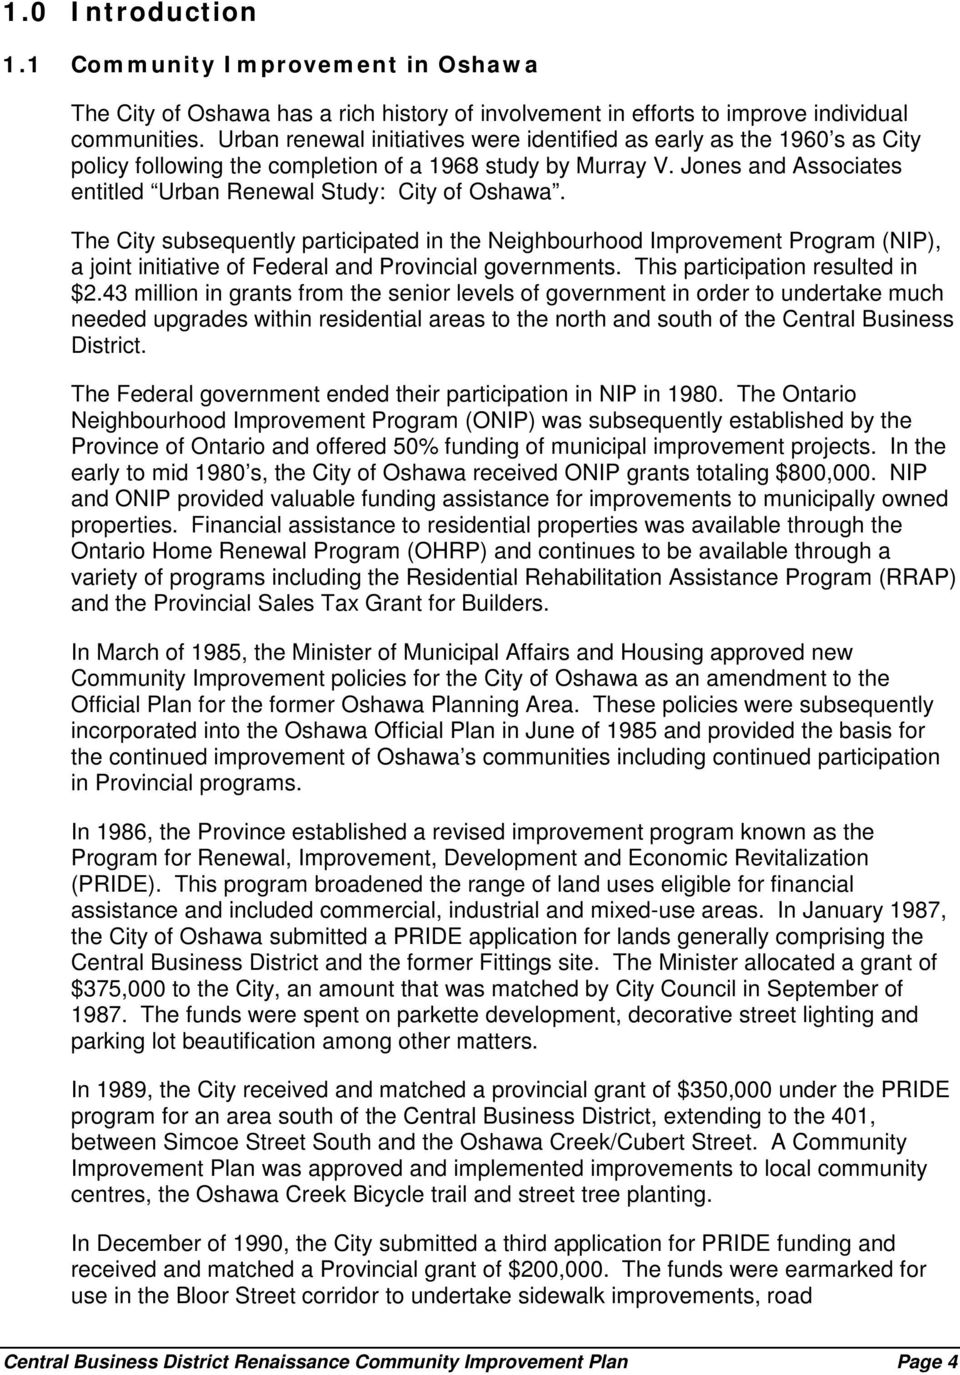 The City subsequently participated in the Neighbourhood Improvement Program (NIP), a joint initiative of Federal and Provincial governments. This participation resulted in $2.